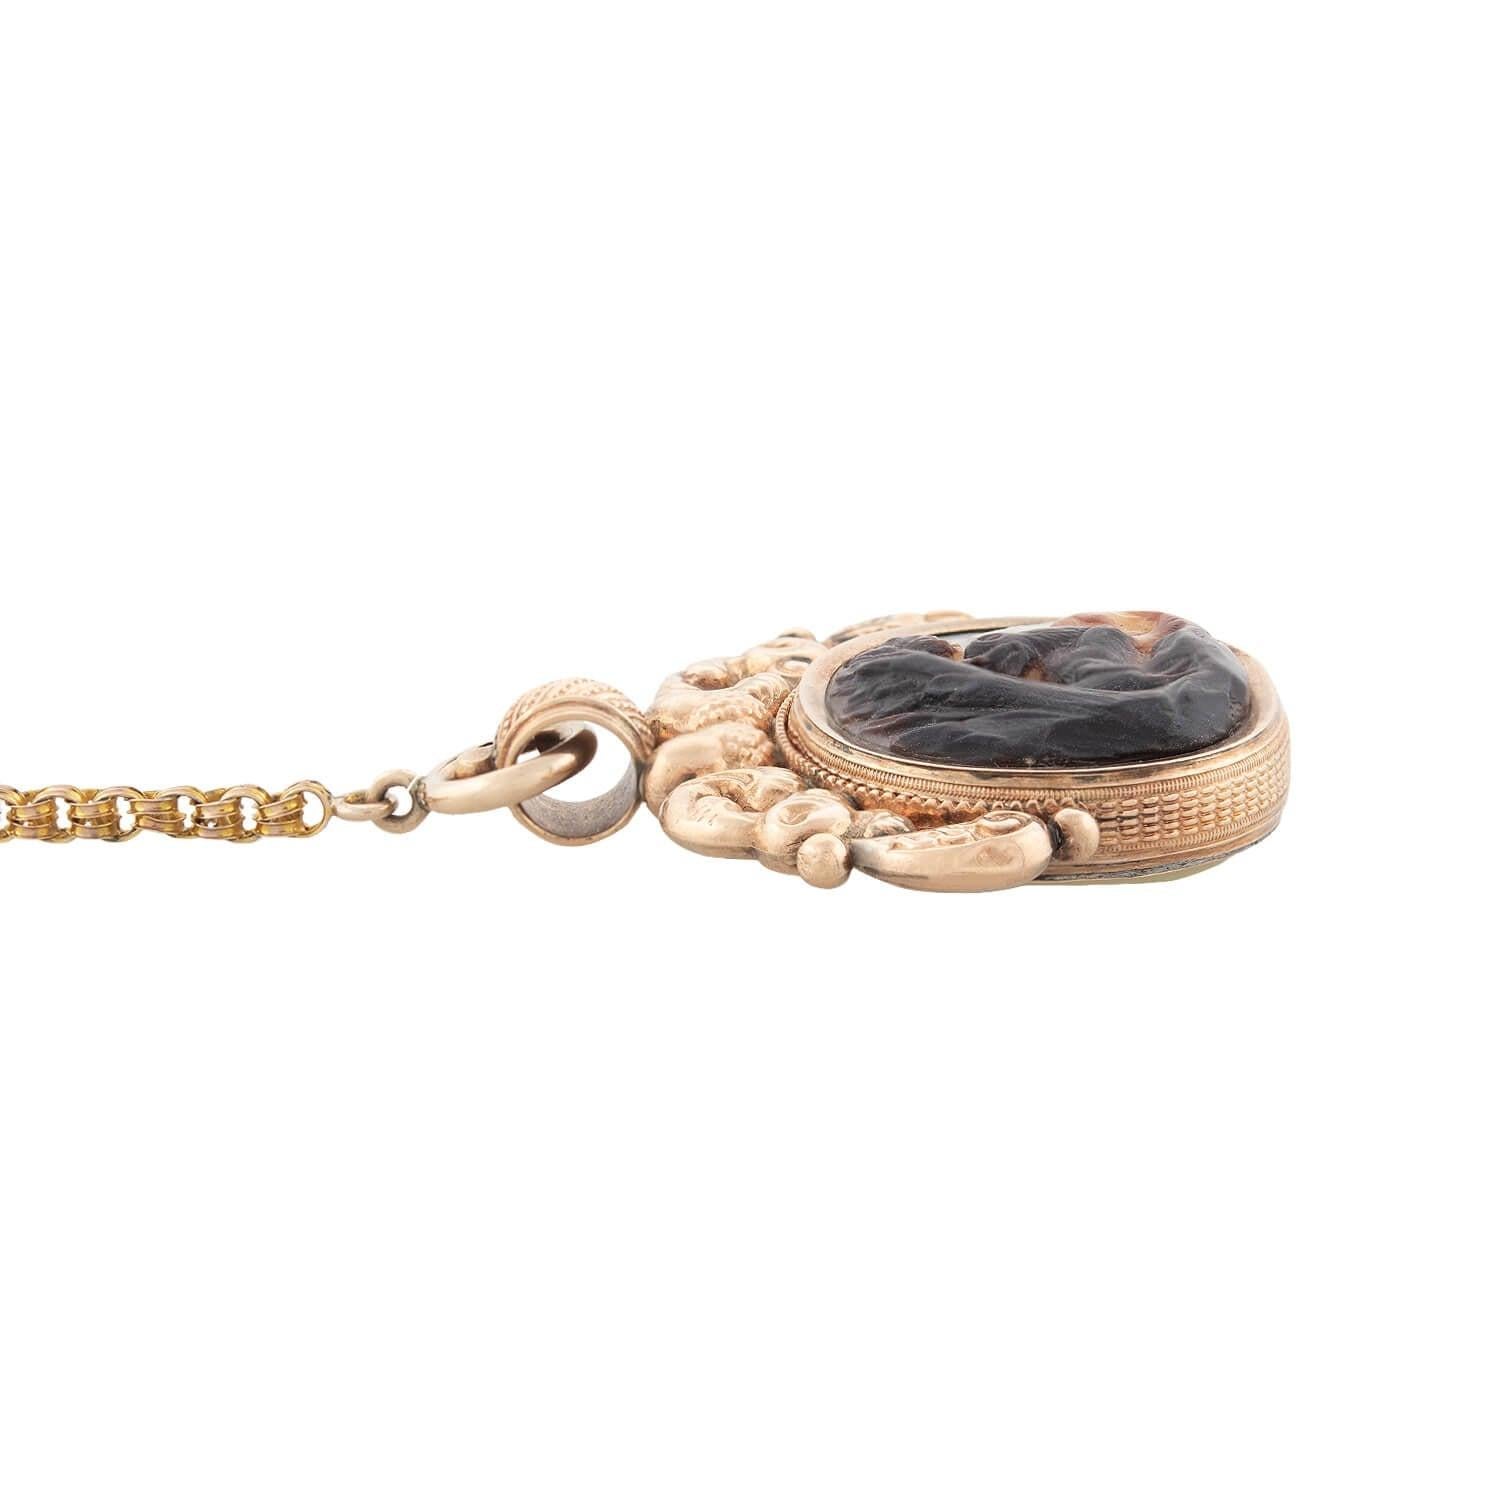 A stunning spinner fob necklace from the Early Victorian (ca1865) era! Crafted in 14kt yellow gold, this spinner fob has an ornate double-sided hand-carved design. One side depicts a bear surrounded by two dogs in a forest setting. The design is